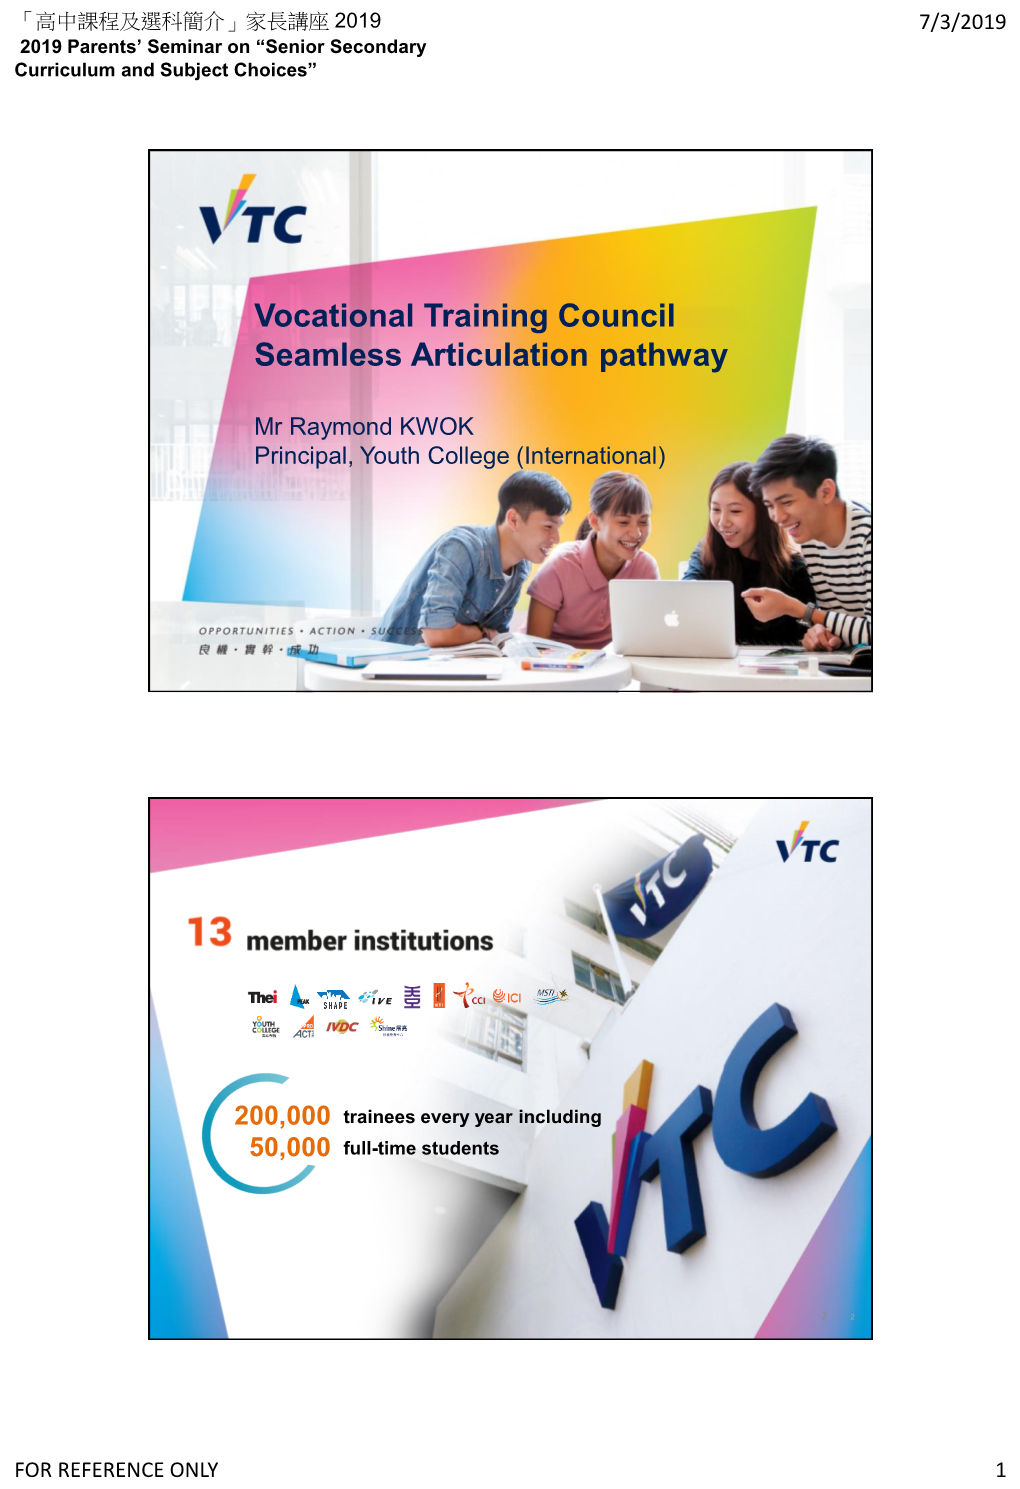 Vocational Training Council Seamless Articulation Pathway